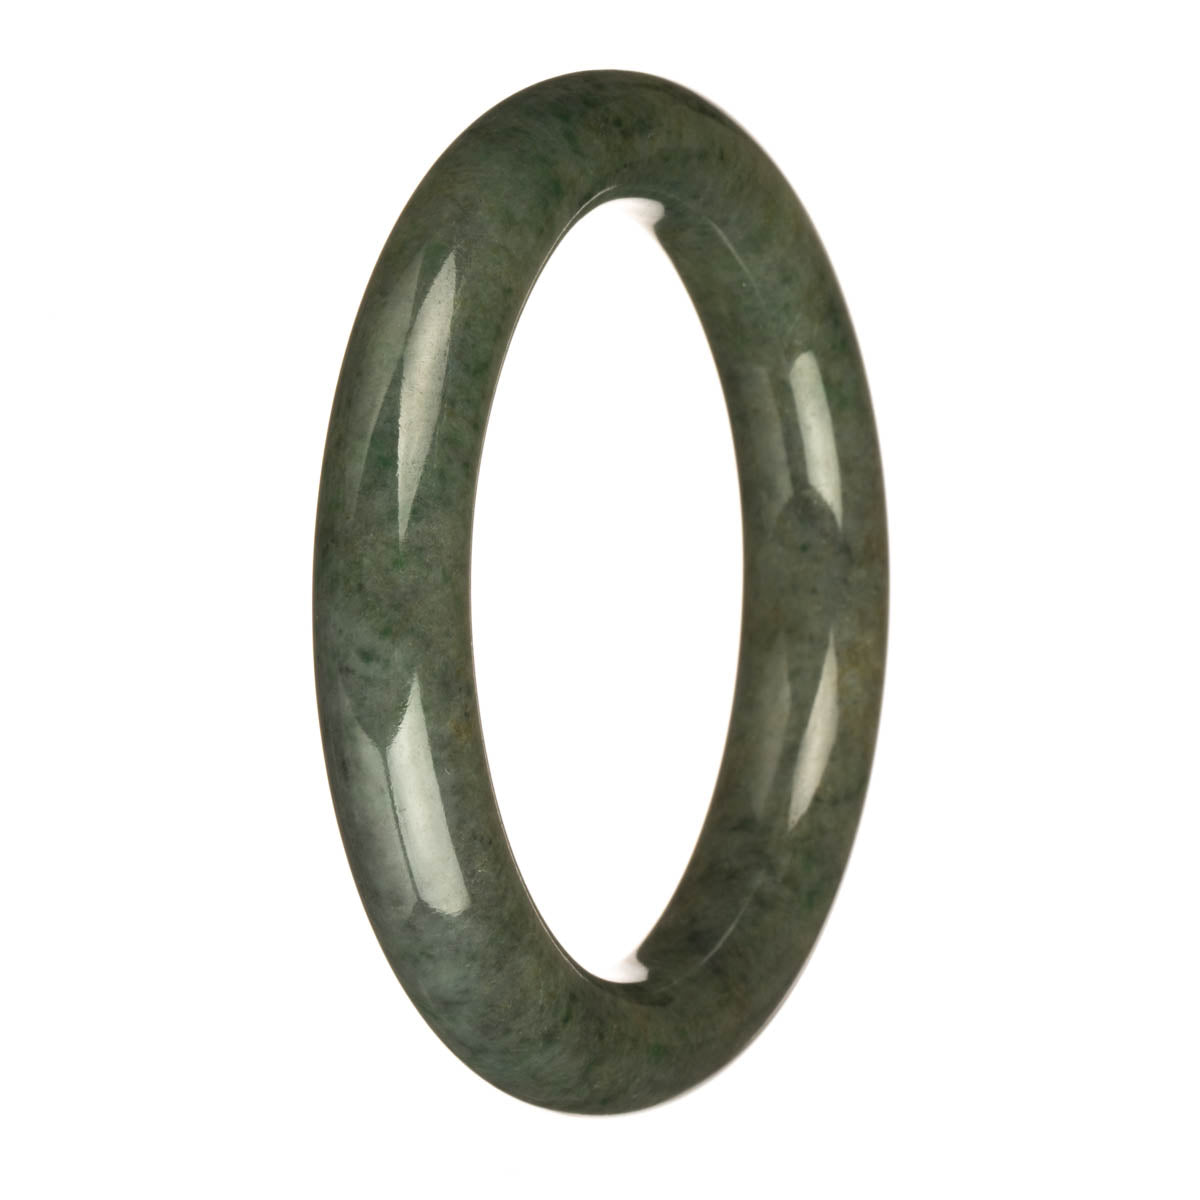 A round bracelet made of high-quality grey Burma Jade with beautiful apple green patterns. This bracelet has a diameter of 61mm and is a stunning piece from the MAYS™ collection.